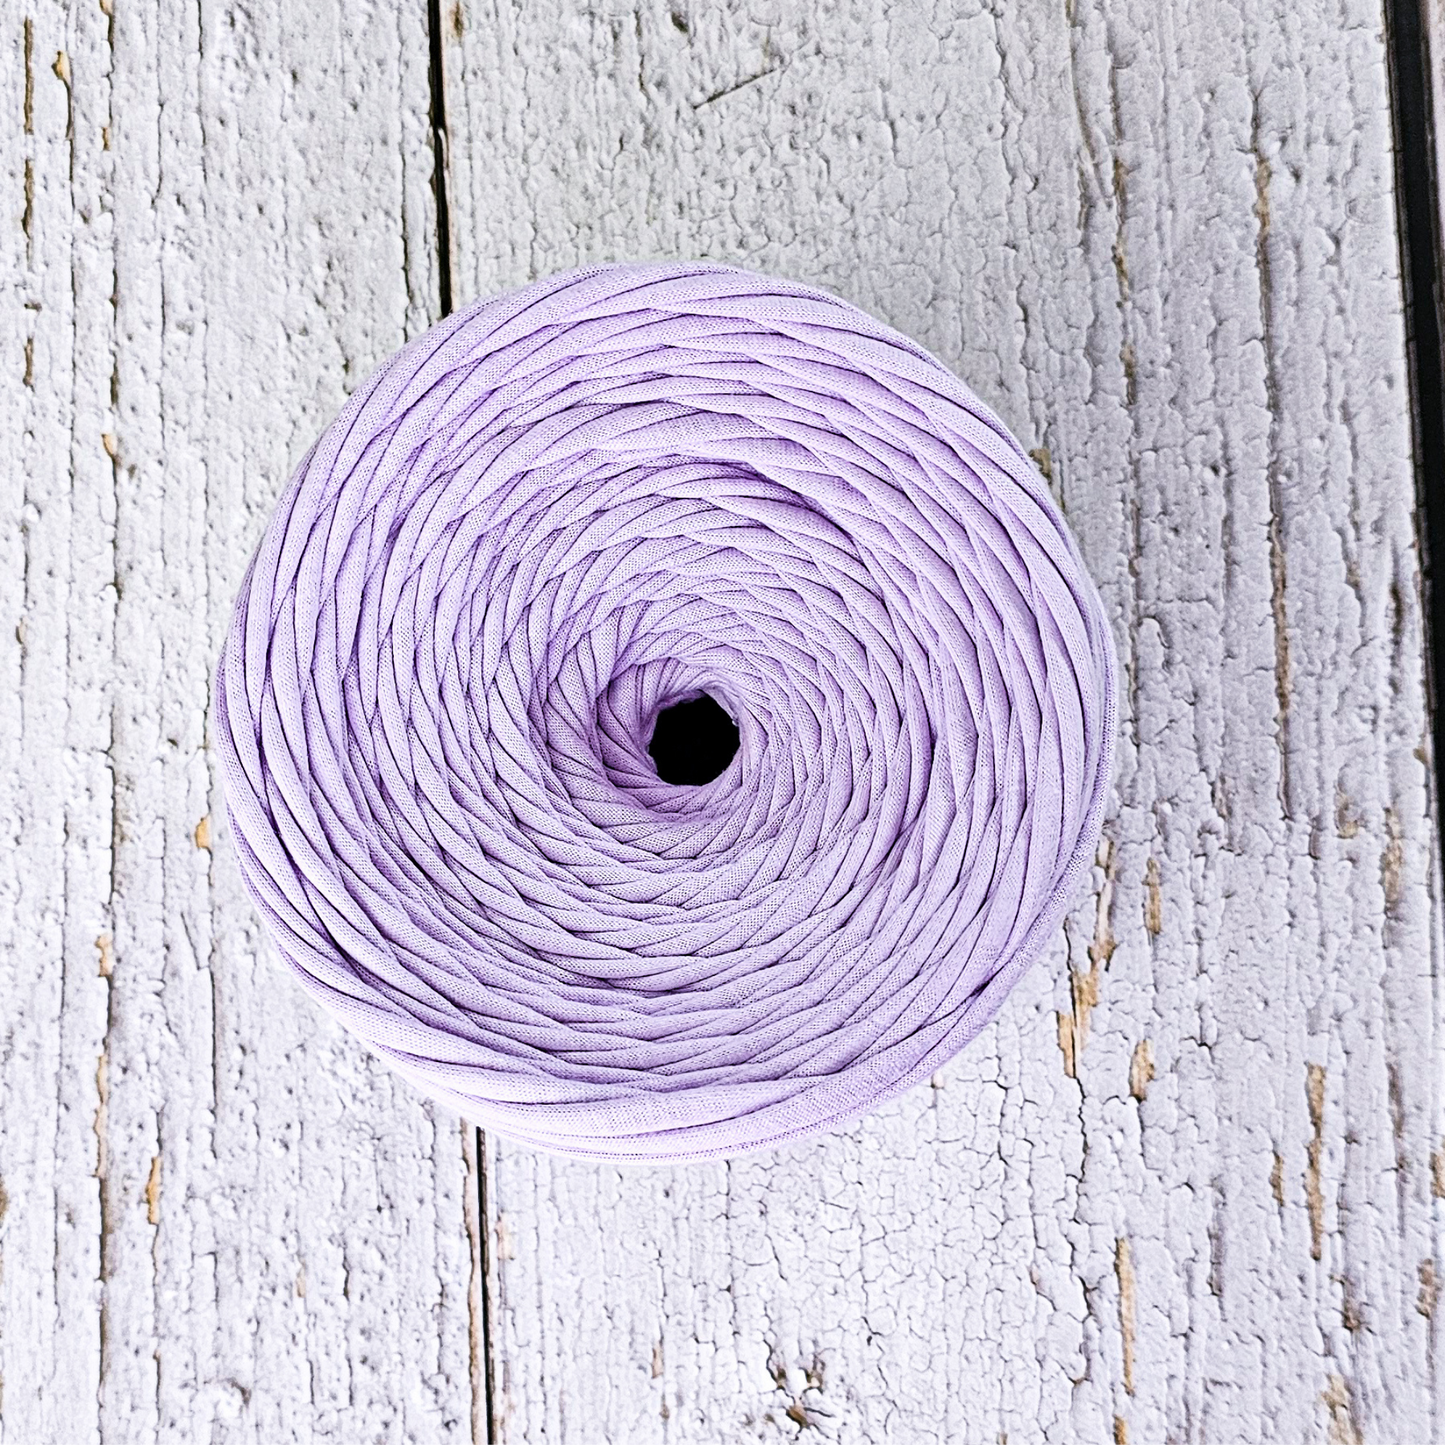 T-shirt yarn for crocheting baskets, bags, rugs and home decor. Lavender